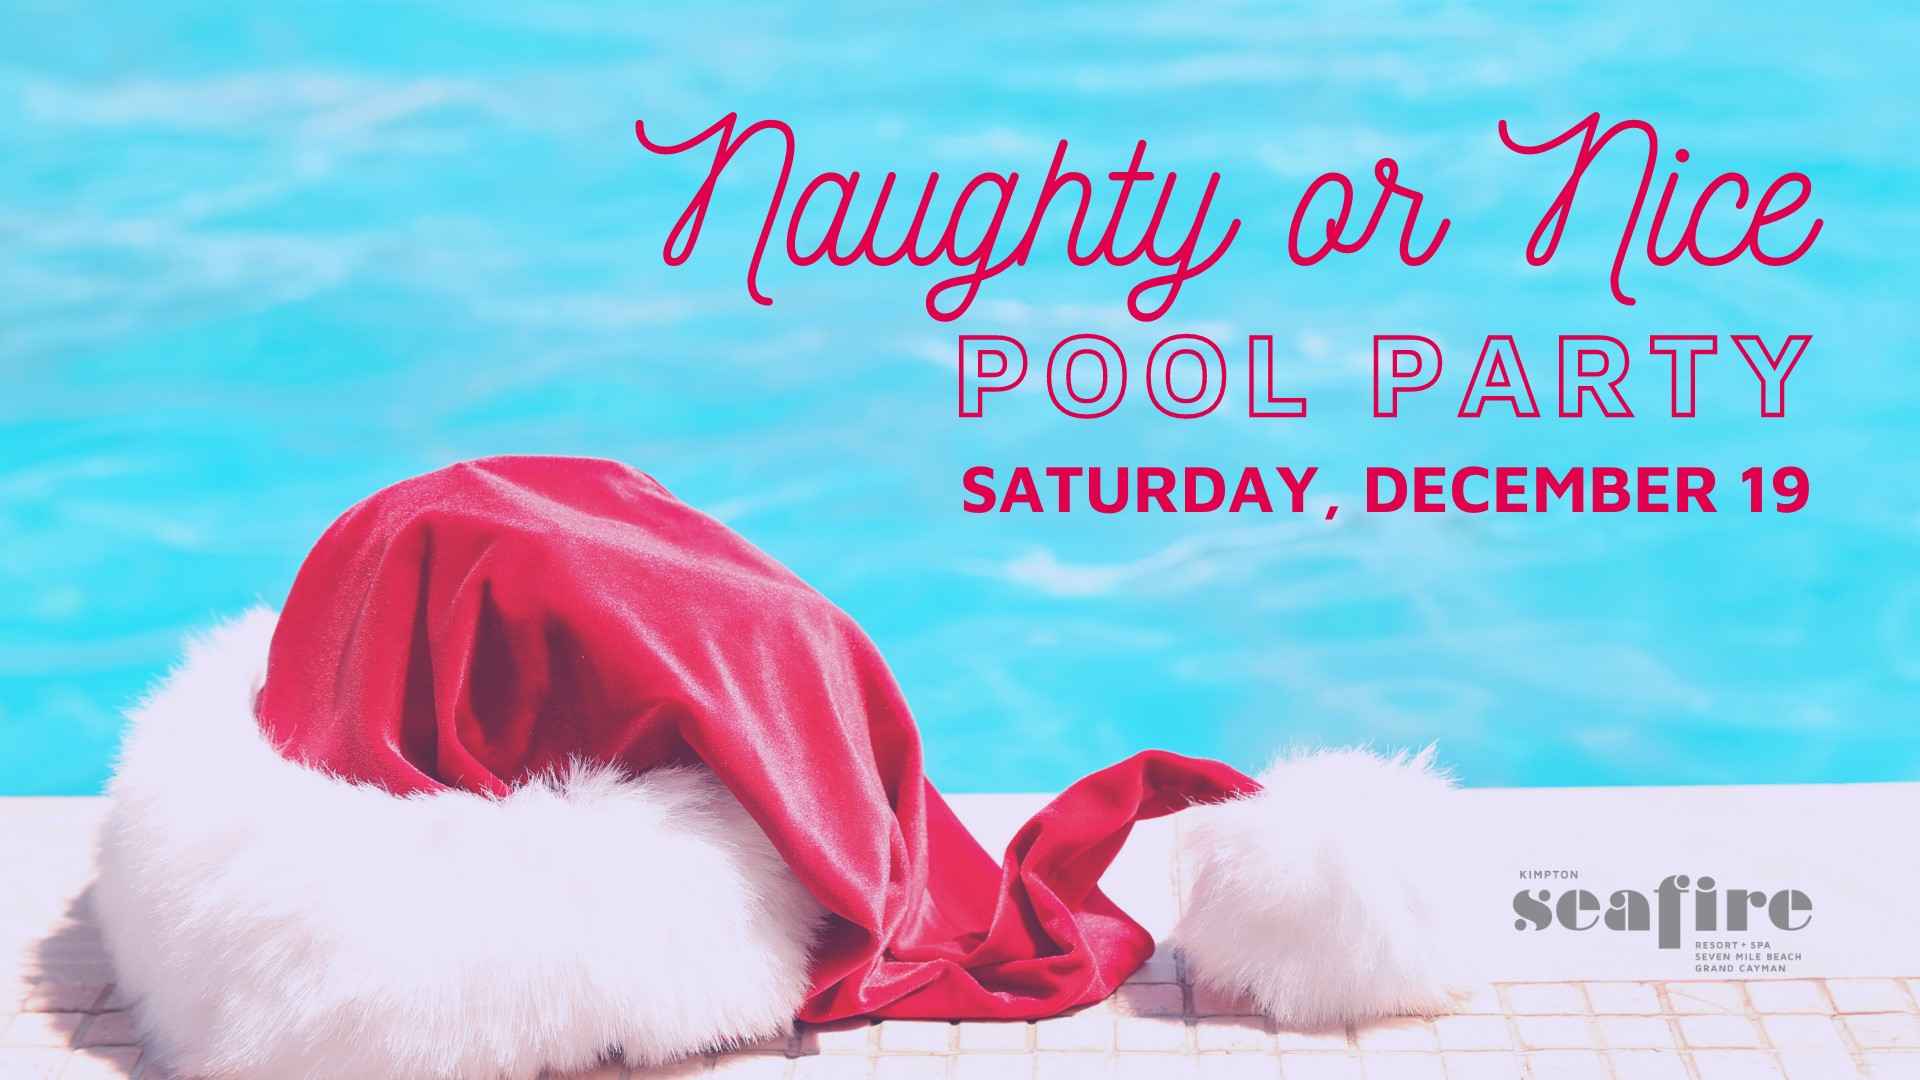 Naughty Or Nice Pool Party Kimpton Seafire By Explore Cayman 4219